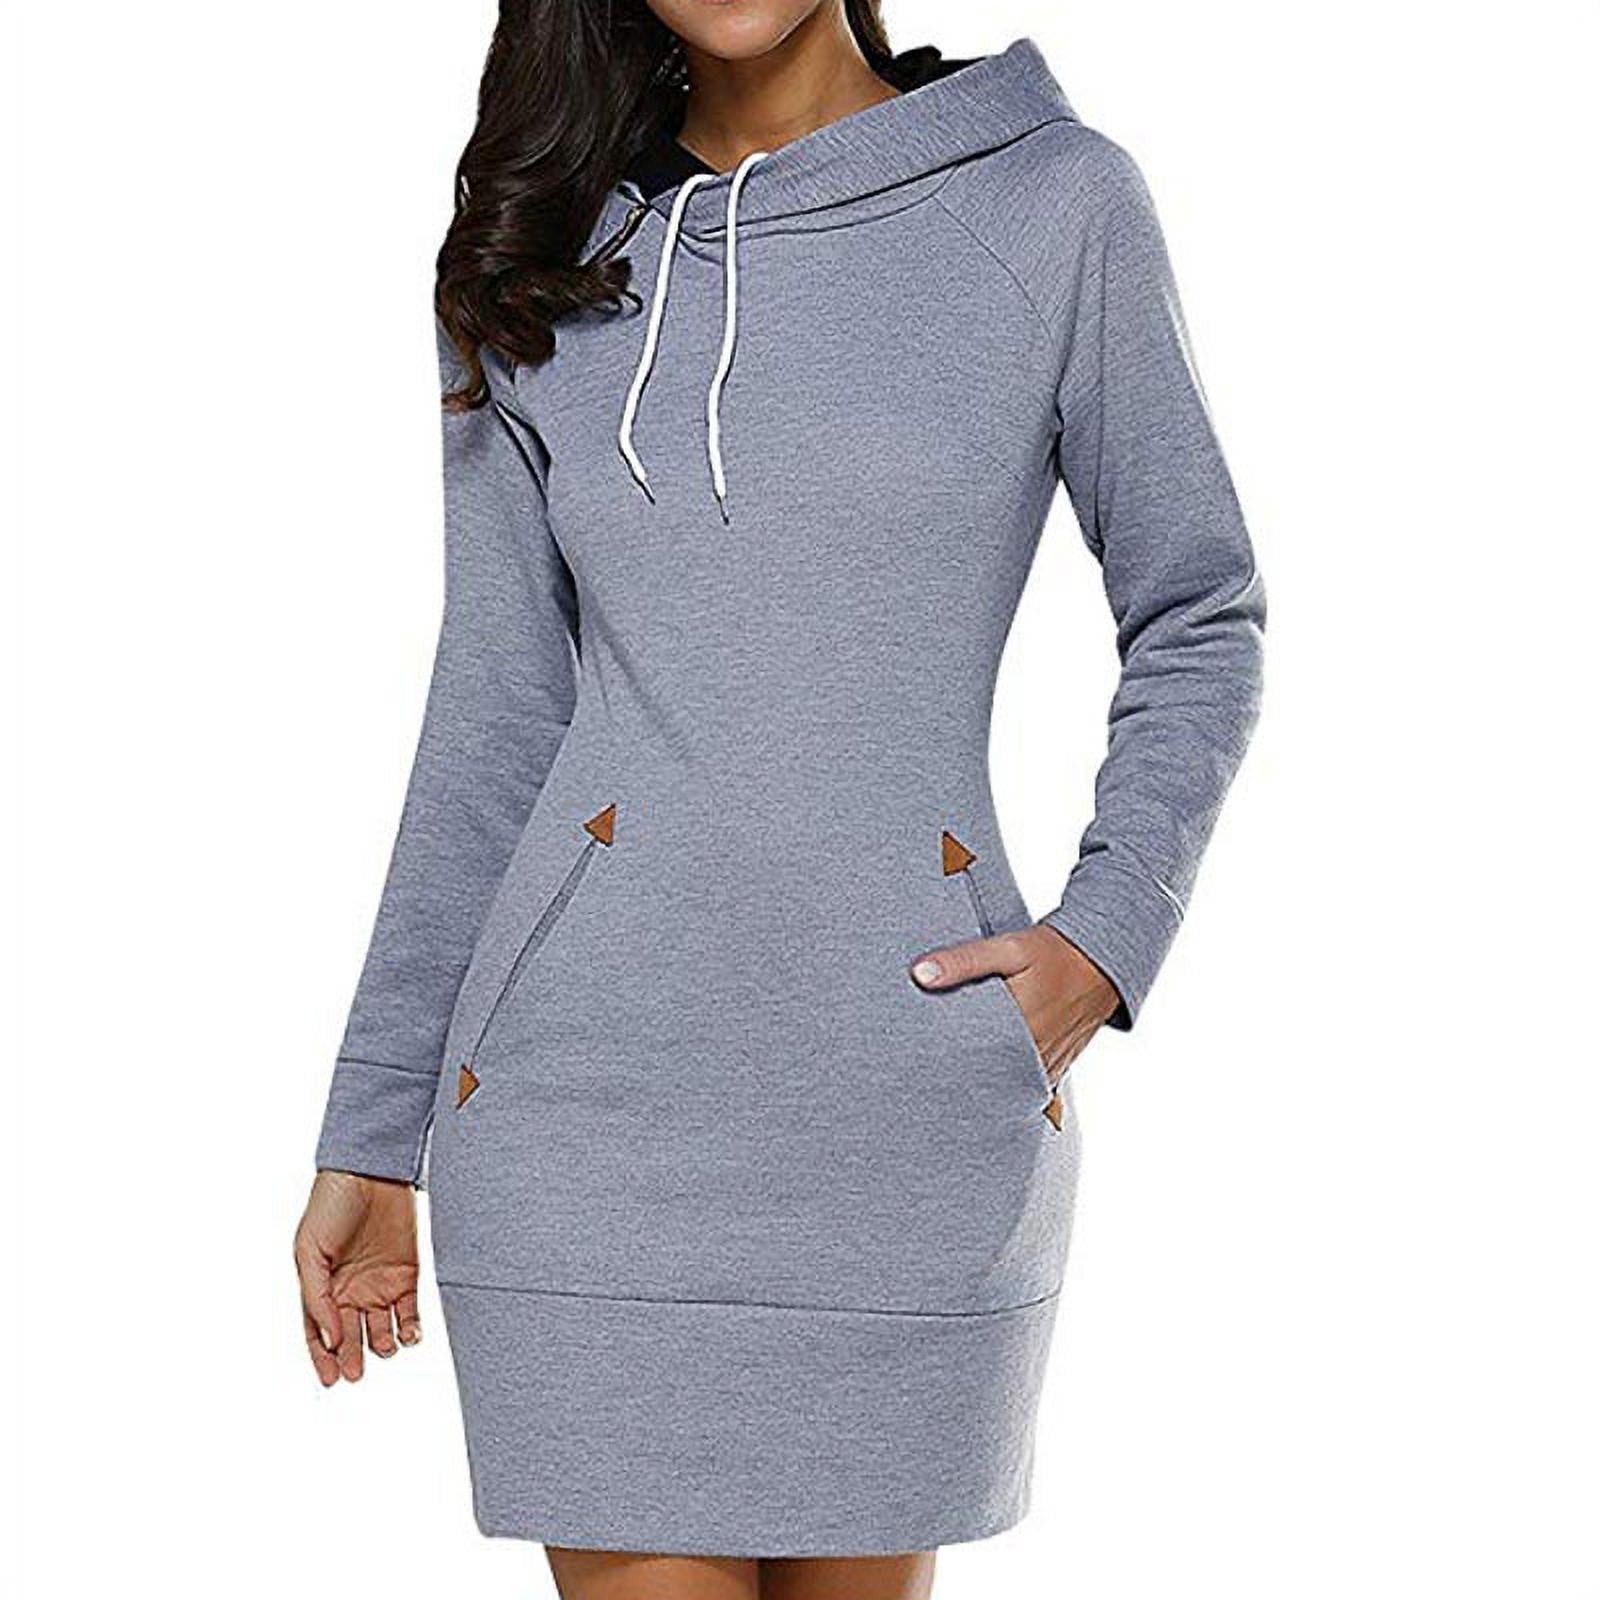 Nirovien Womens Long Sleeve Hoodie Dress Solid Waist Ruched Pullover Tunic Sweatshirt with Pockets